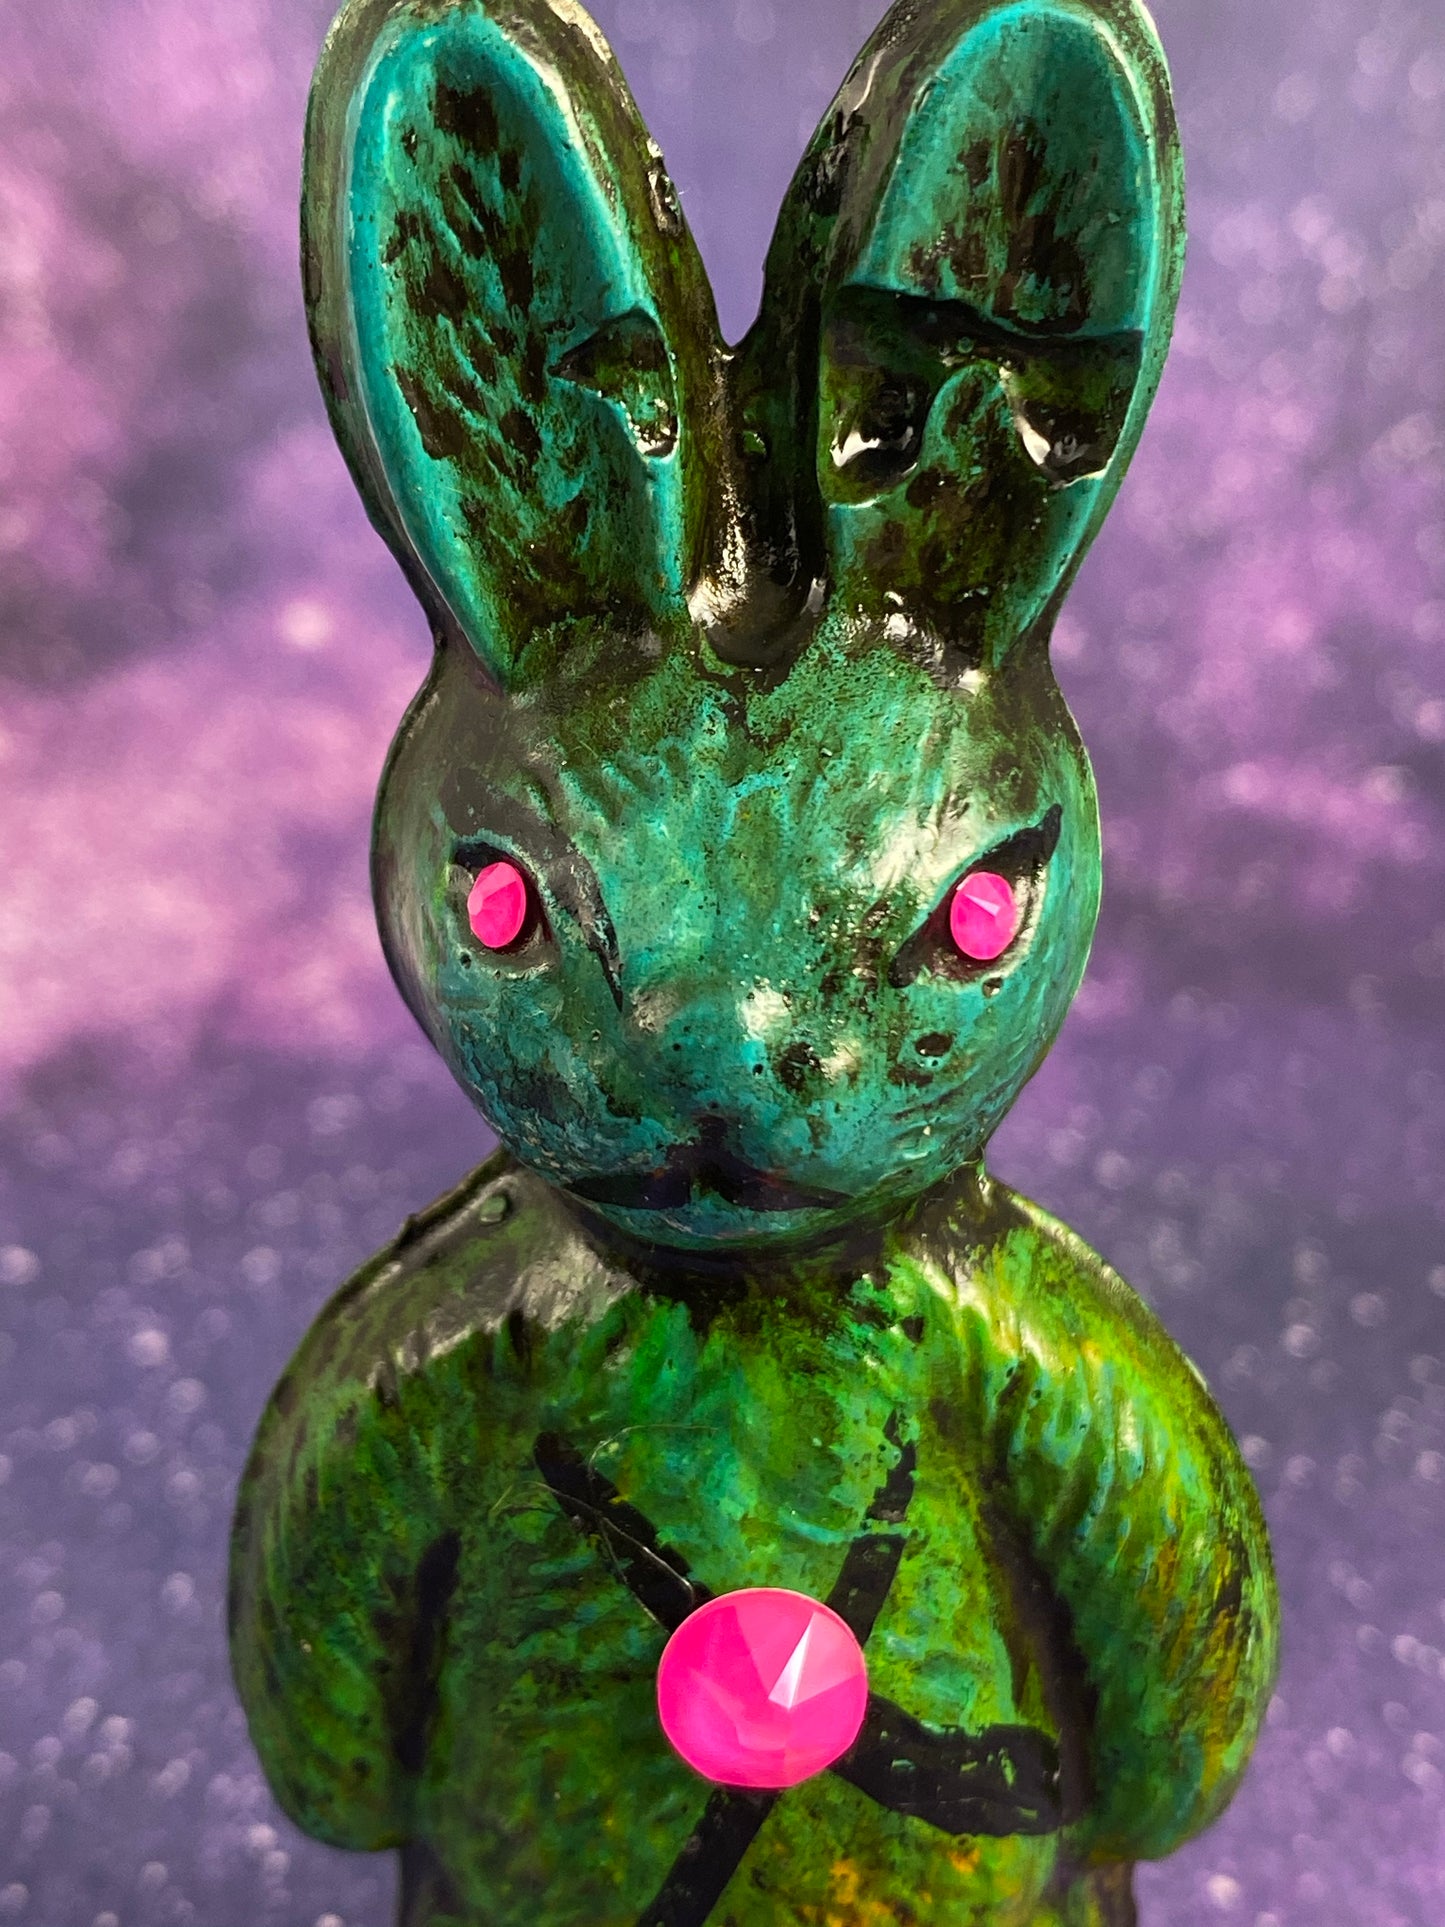 Ticked Off Space Rabbit